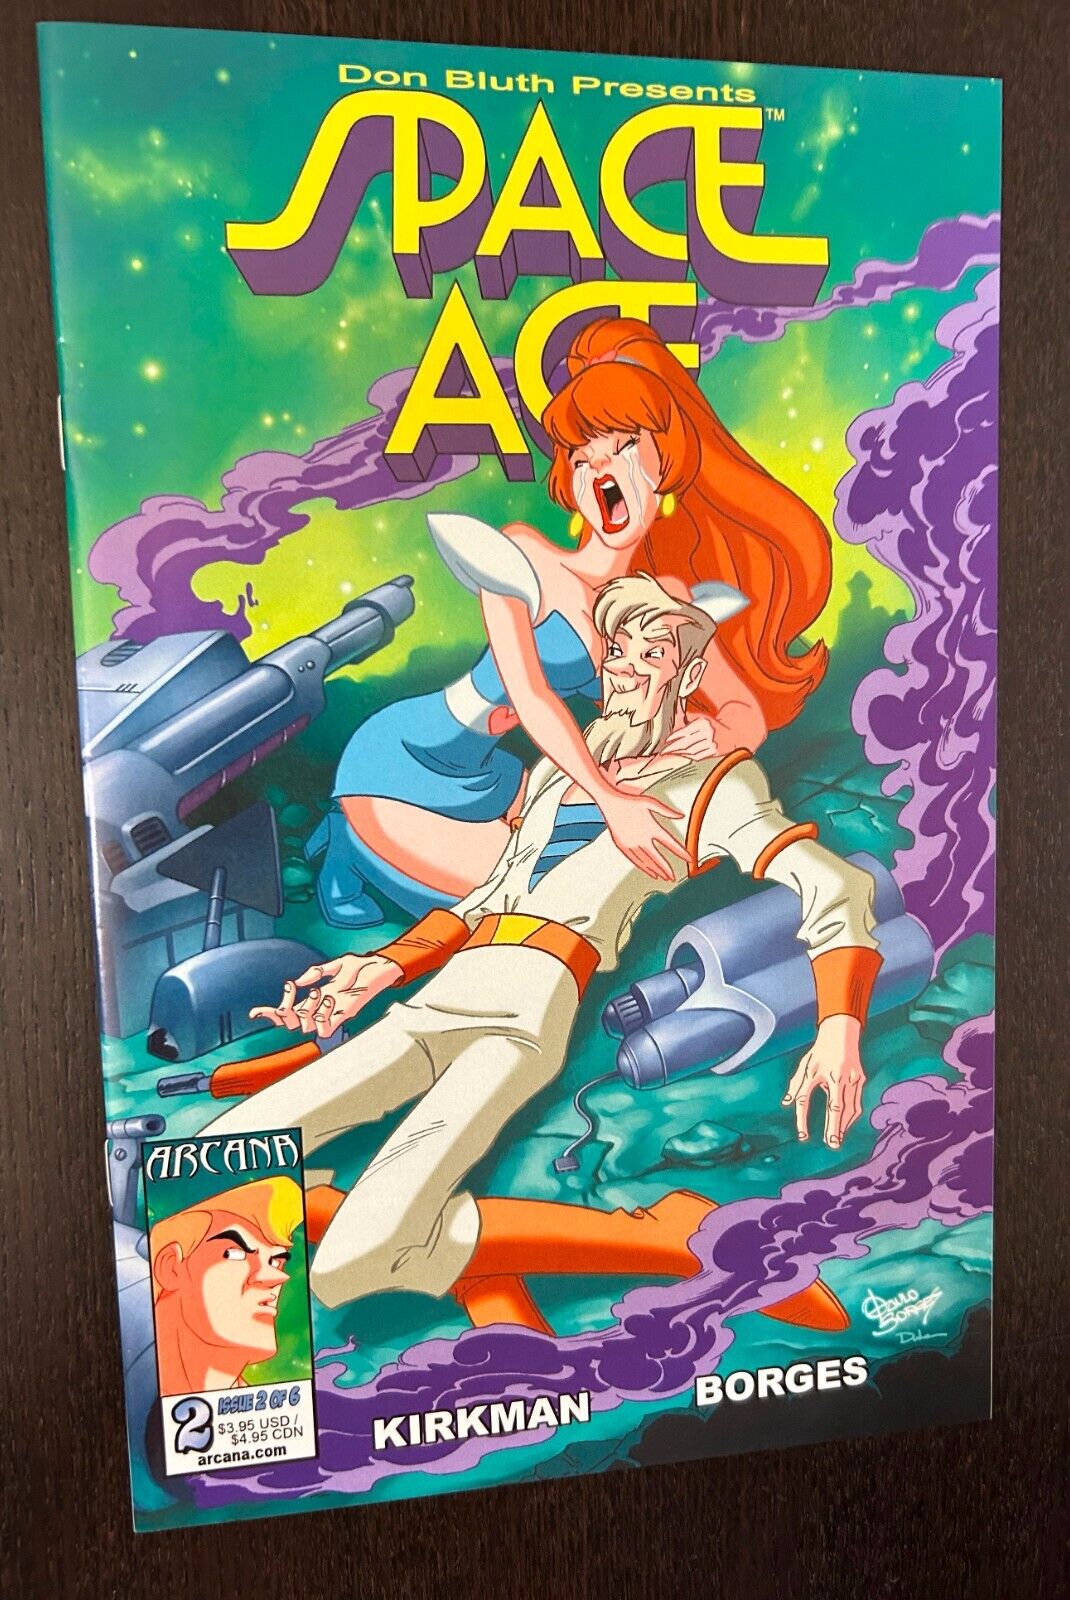 SPACE ACE #2 (Arcana Comics 2009) -- Don Bluth -- NM- Or Better